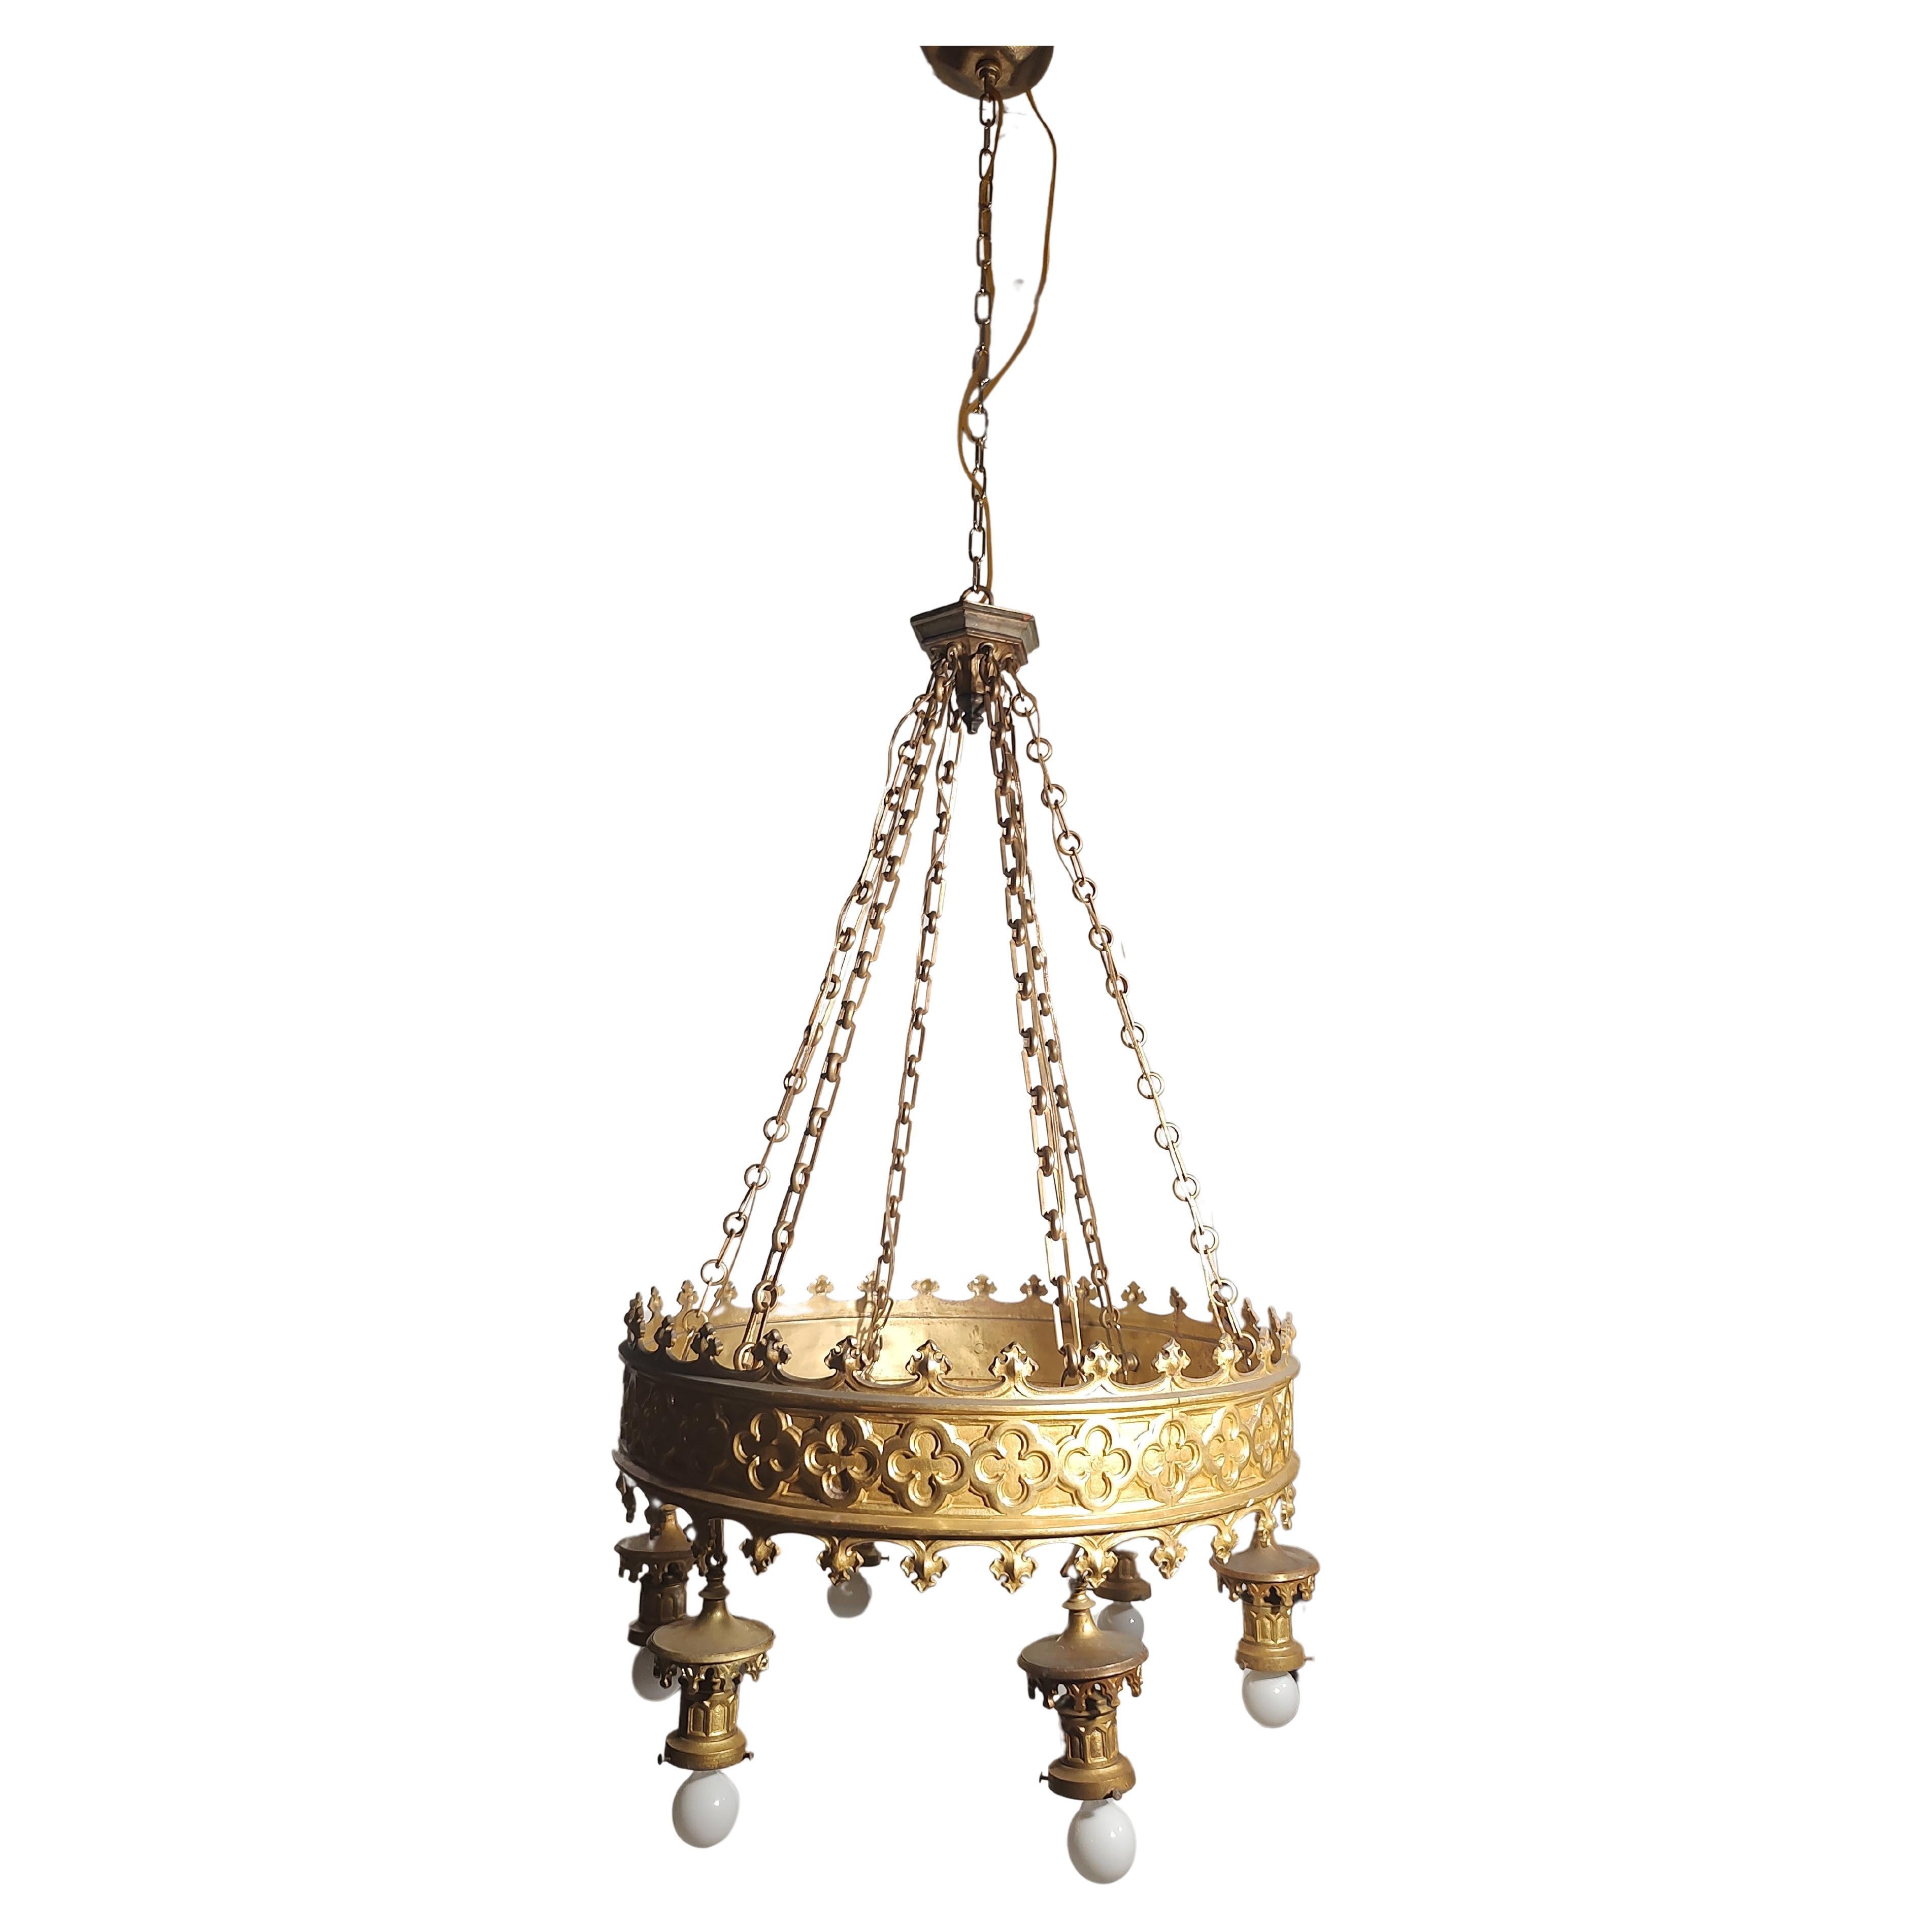 Hand-Crafted Arts & Crafts Art Deco Gilt Brass 6 Light Large Chandelier from a NJ Theatre  For Sale